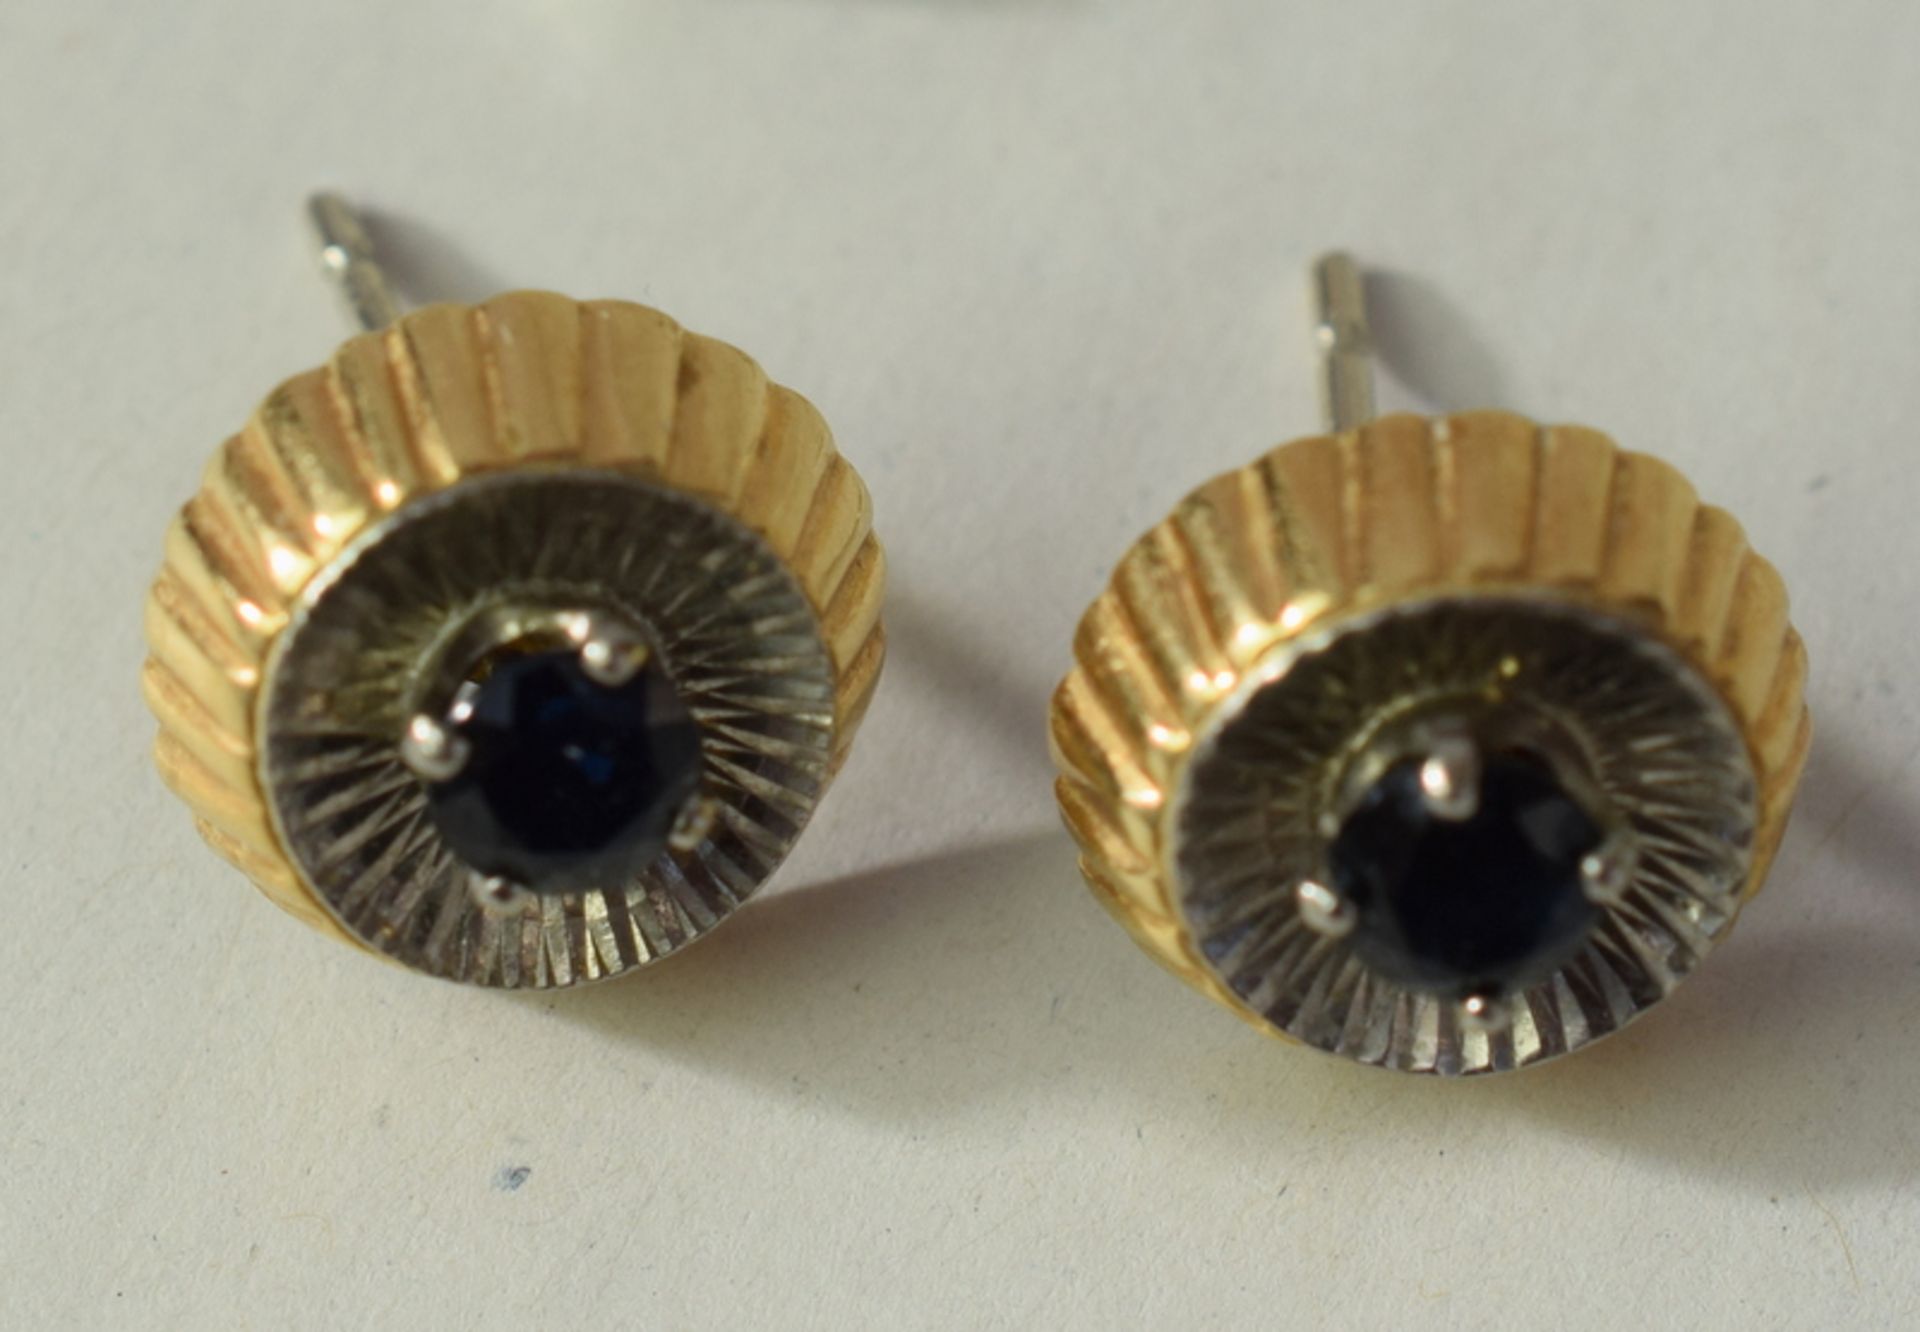 18ct Gold and Sapphire Earrings - Image 2 of 3